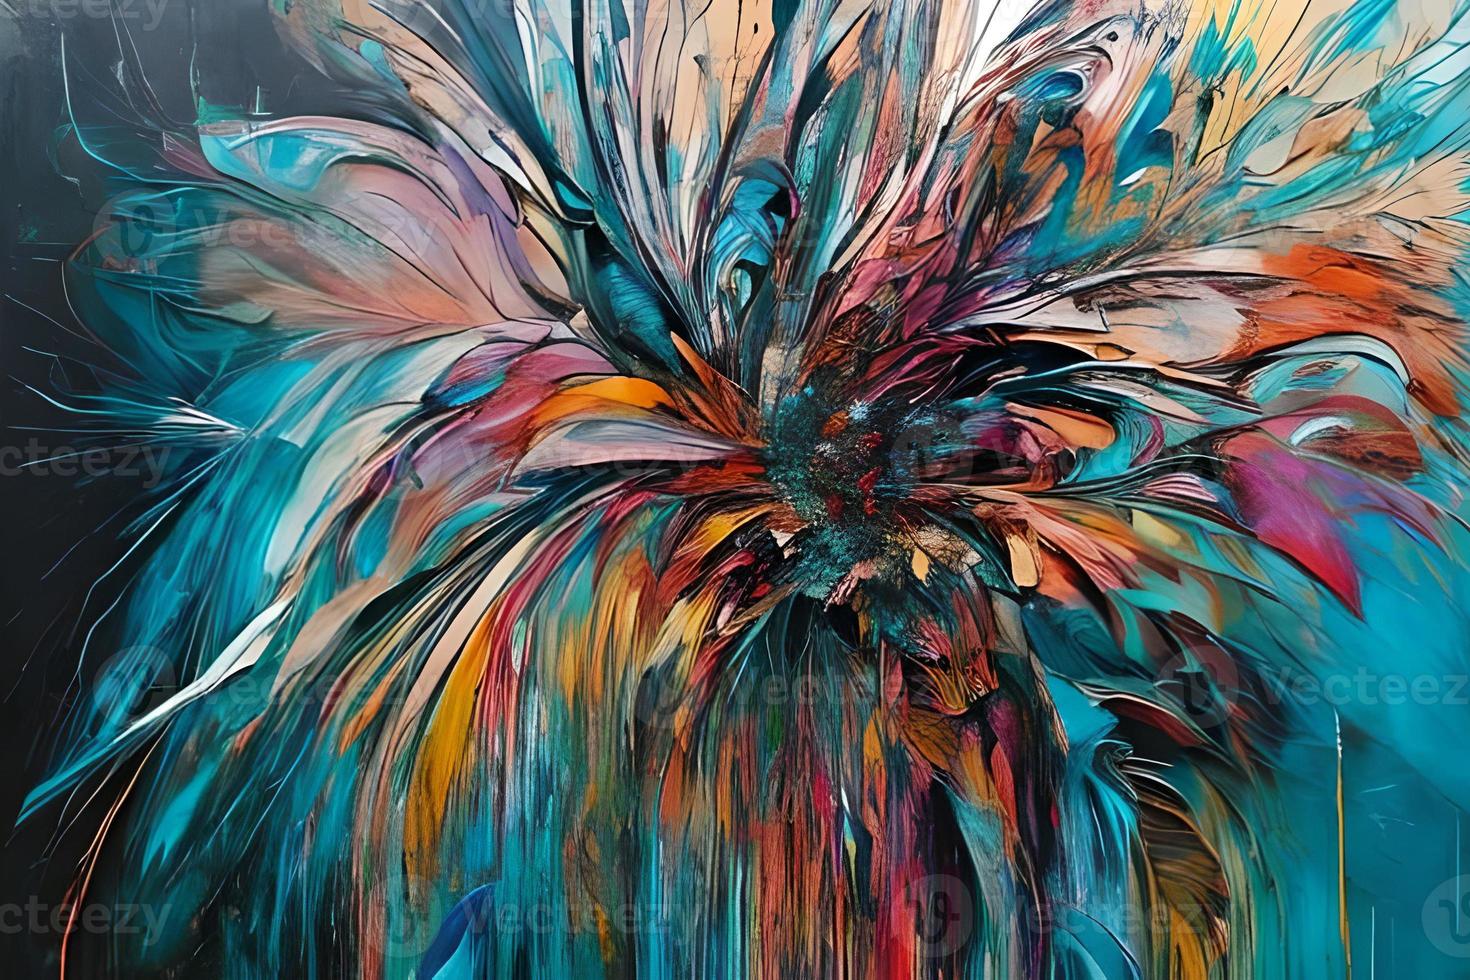 Contemporary acrylic painting fine art illustration of abstract natural close up flowers artistic print digital art. Oil painting. photo